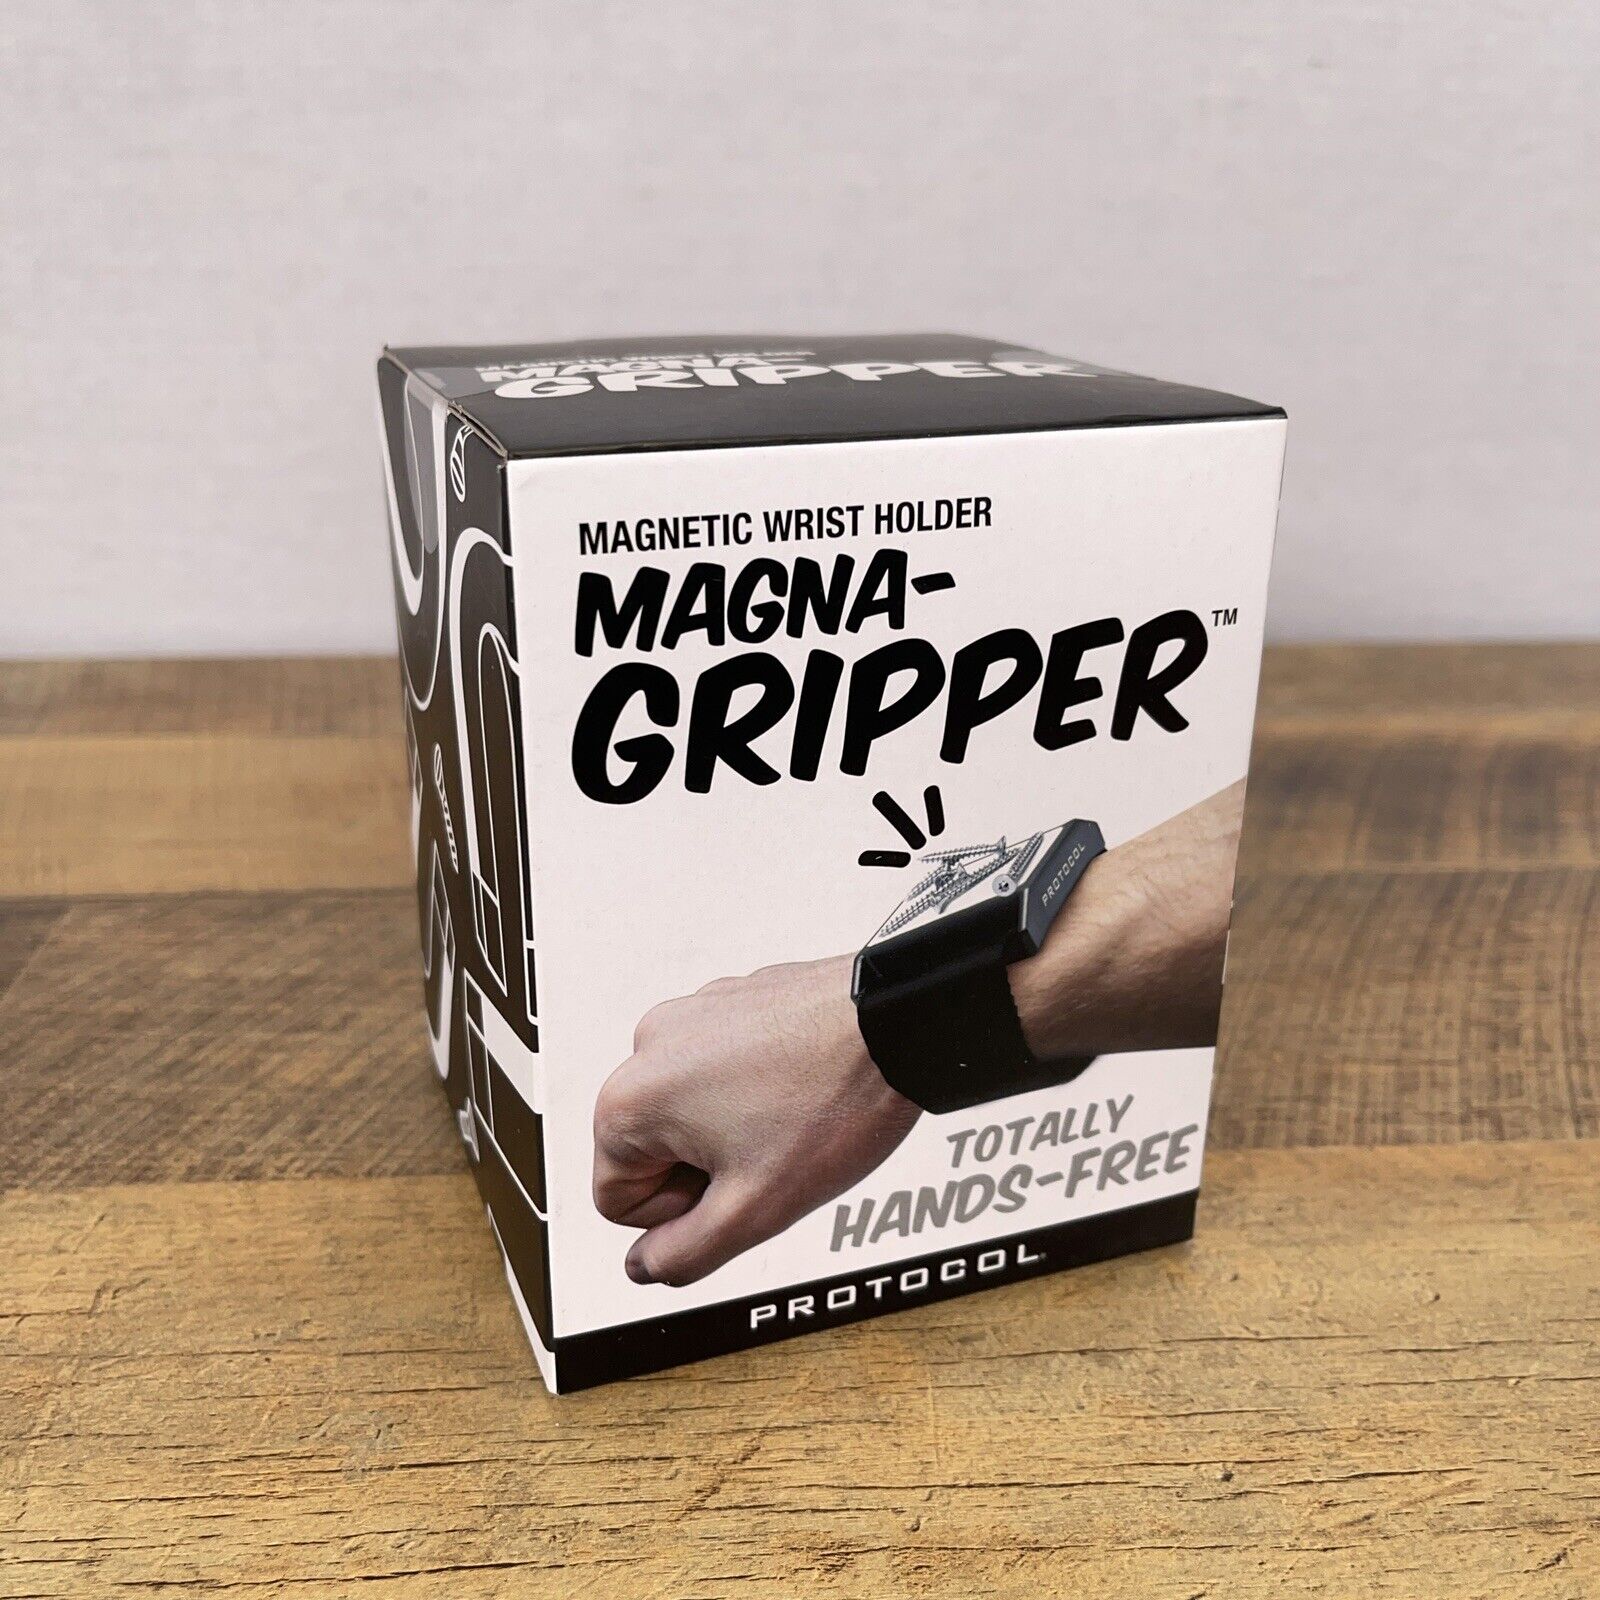 Protocol - Magna-Gripper - Magnetic Wrist Holder - One Size Black/silver - New!!